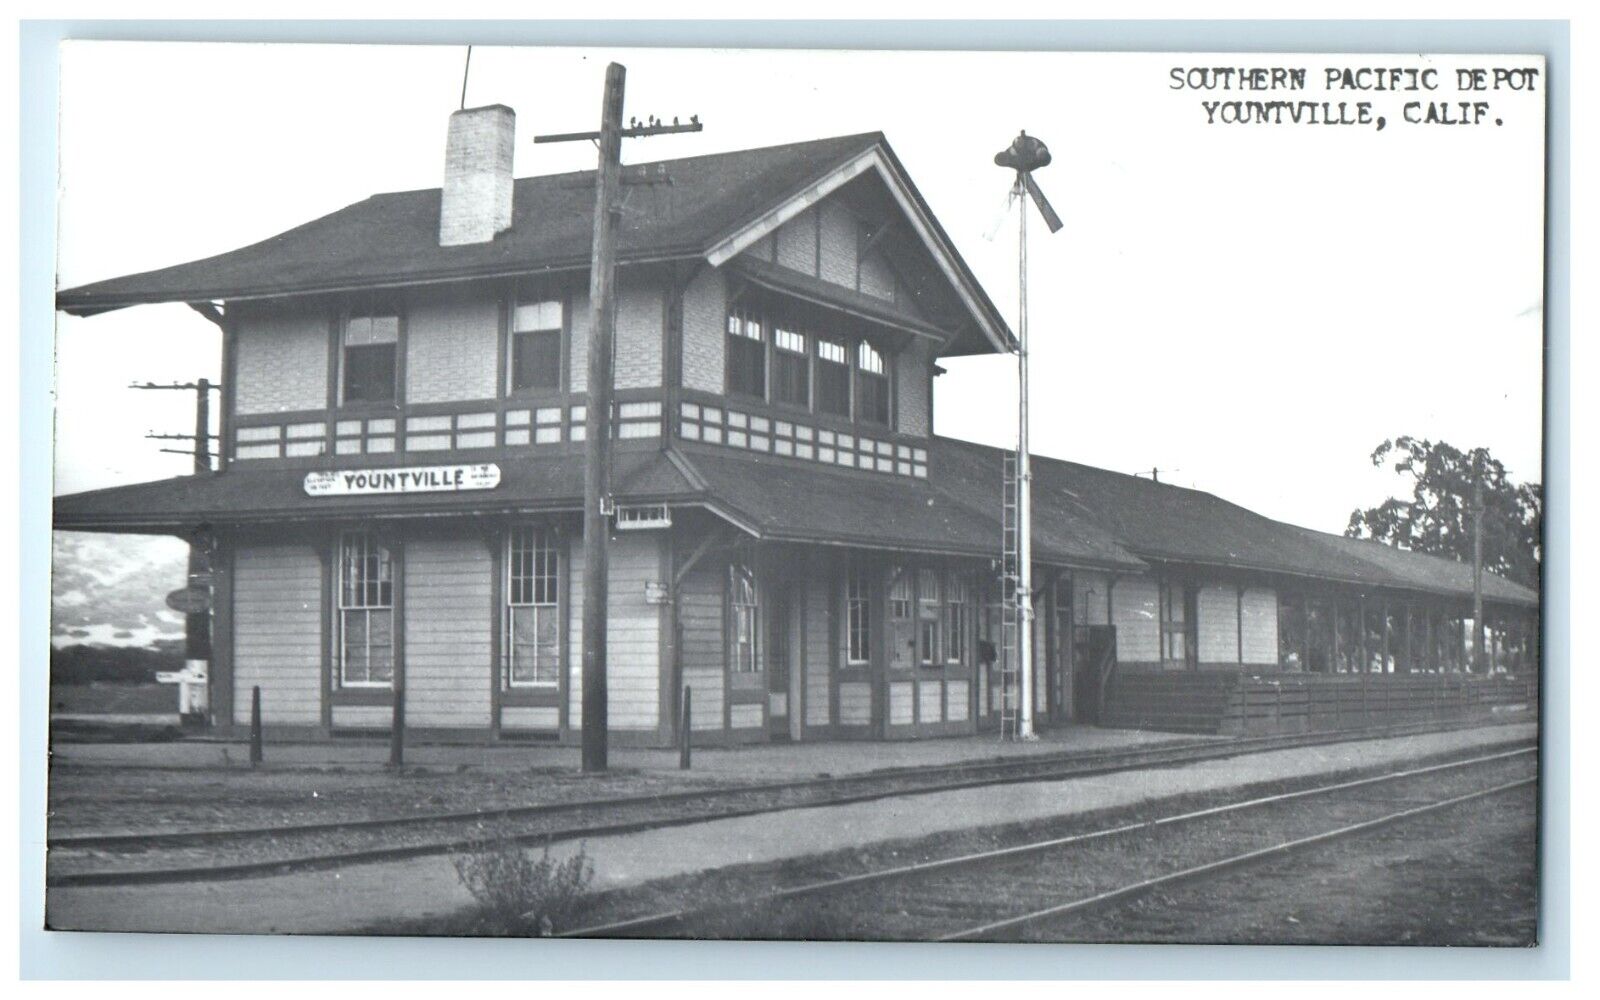 c1950's Southern Pacific Depot Yountville California CA RPPC Photo Postcard